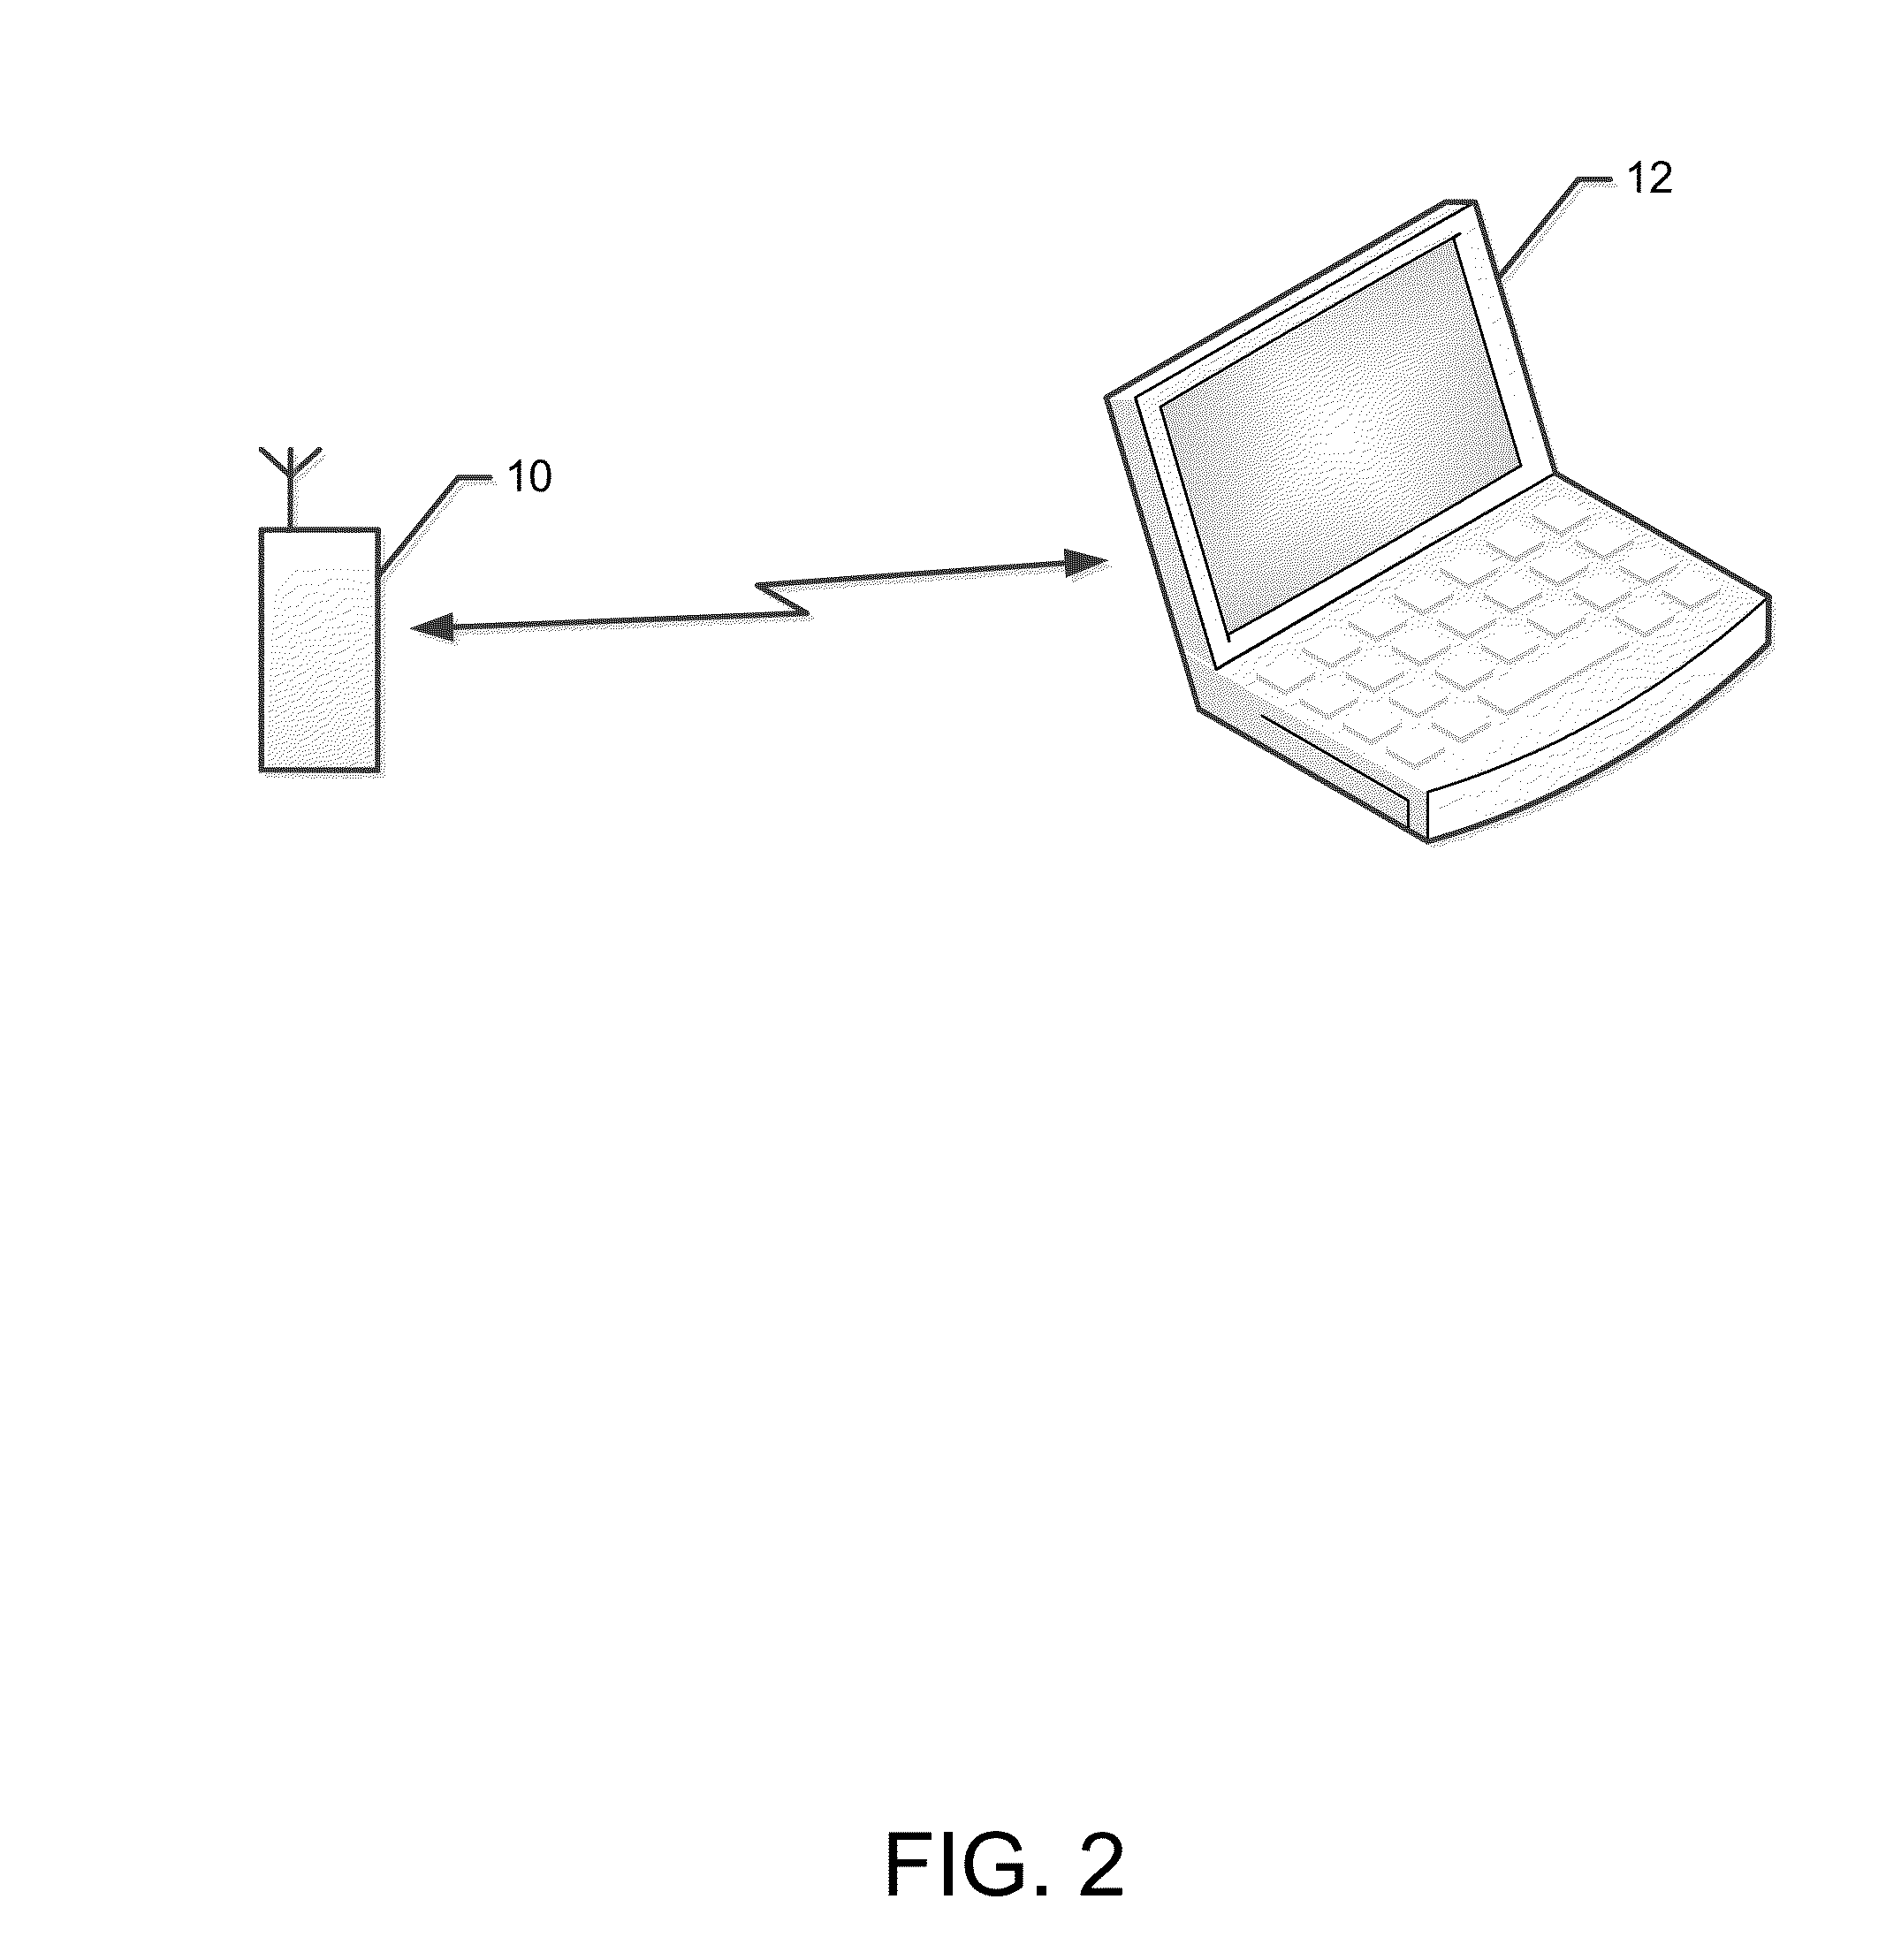 Method and apparatus for utilizing advertisements in conjunction with device discovery